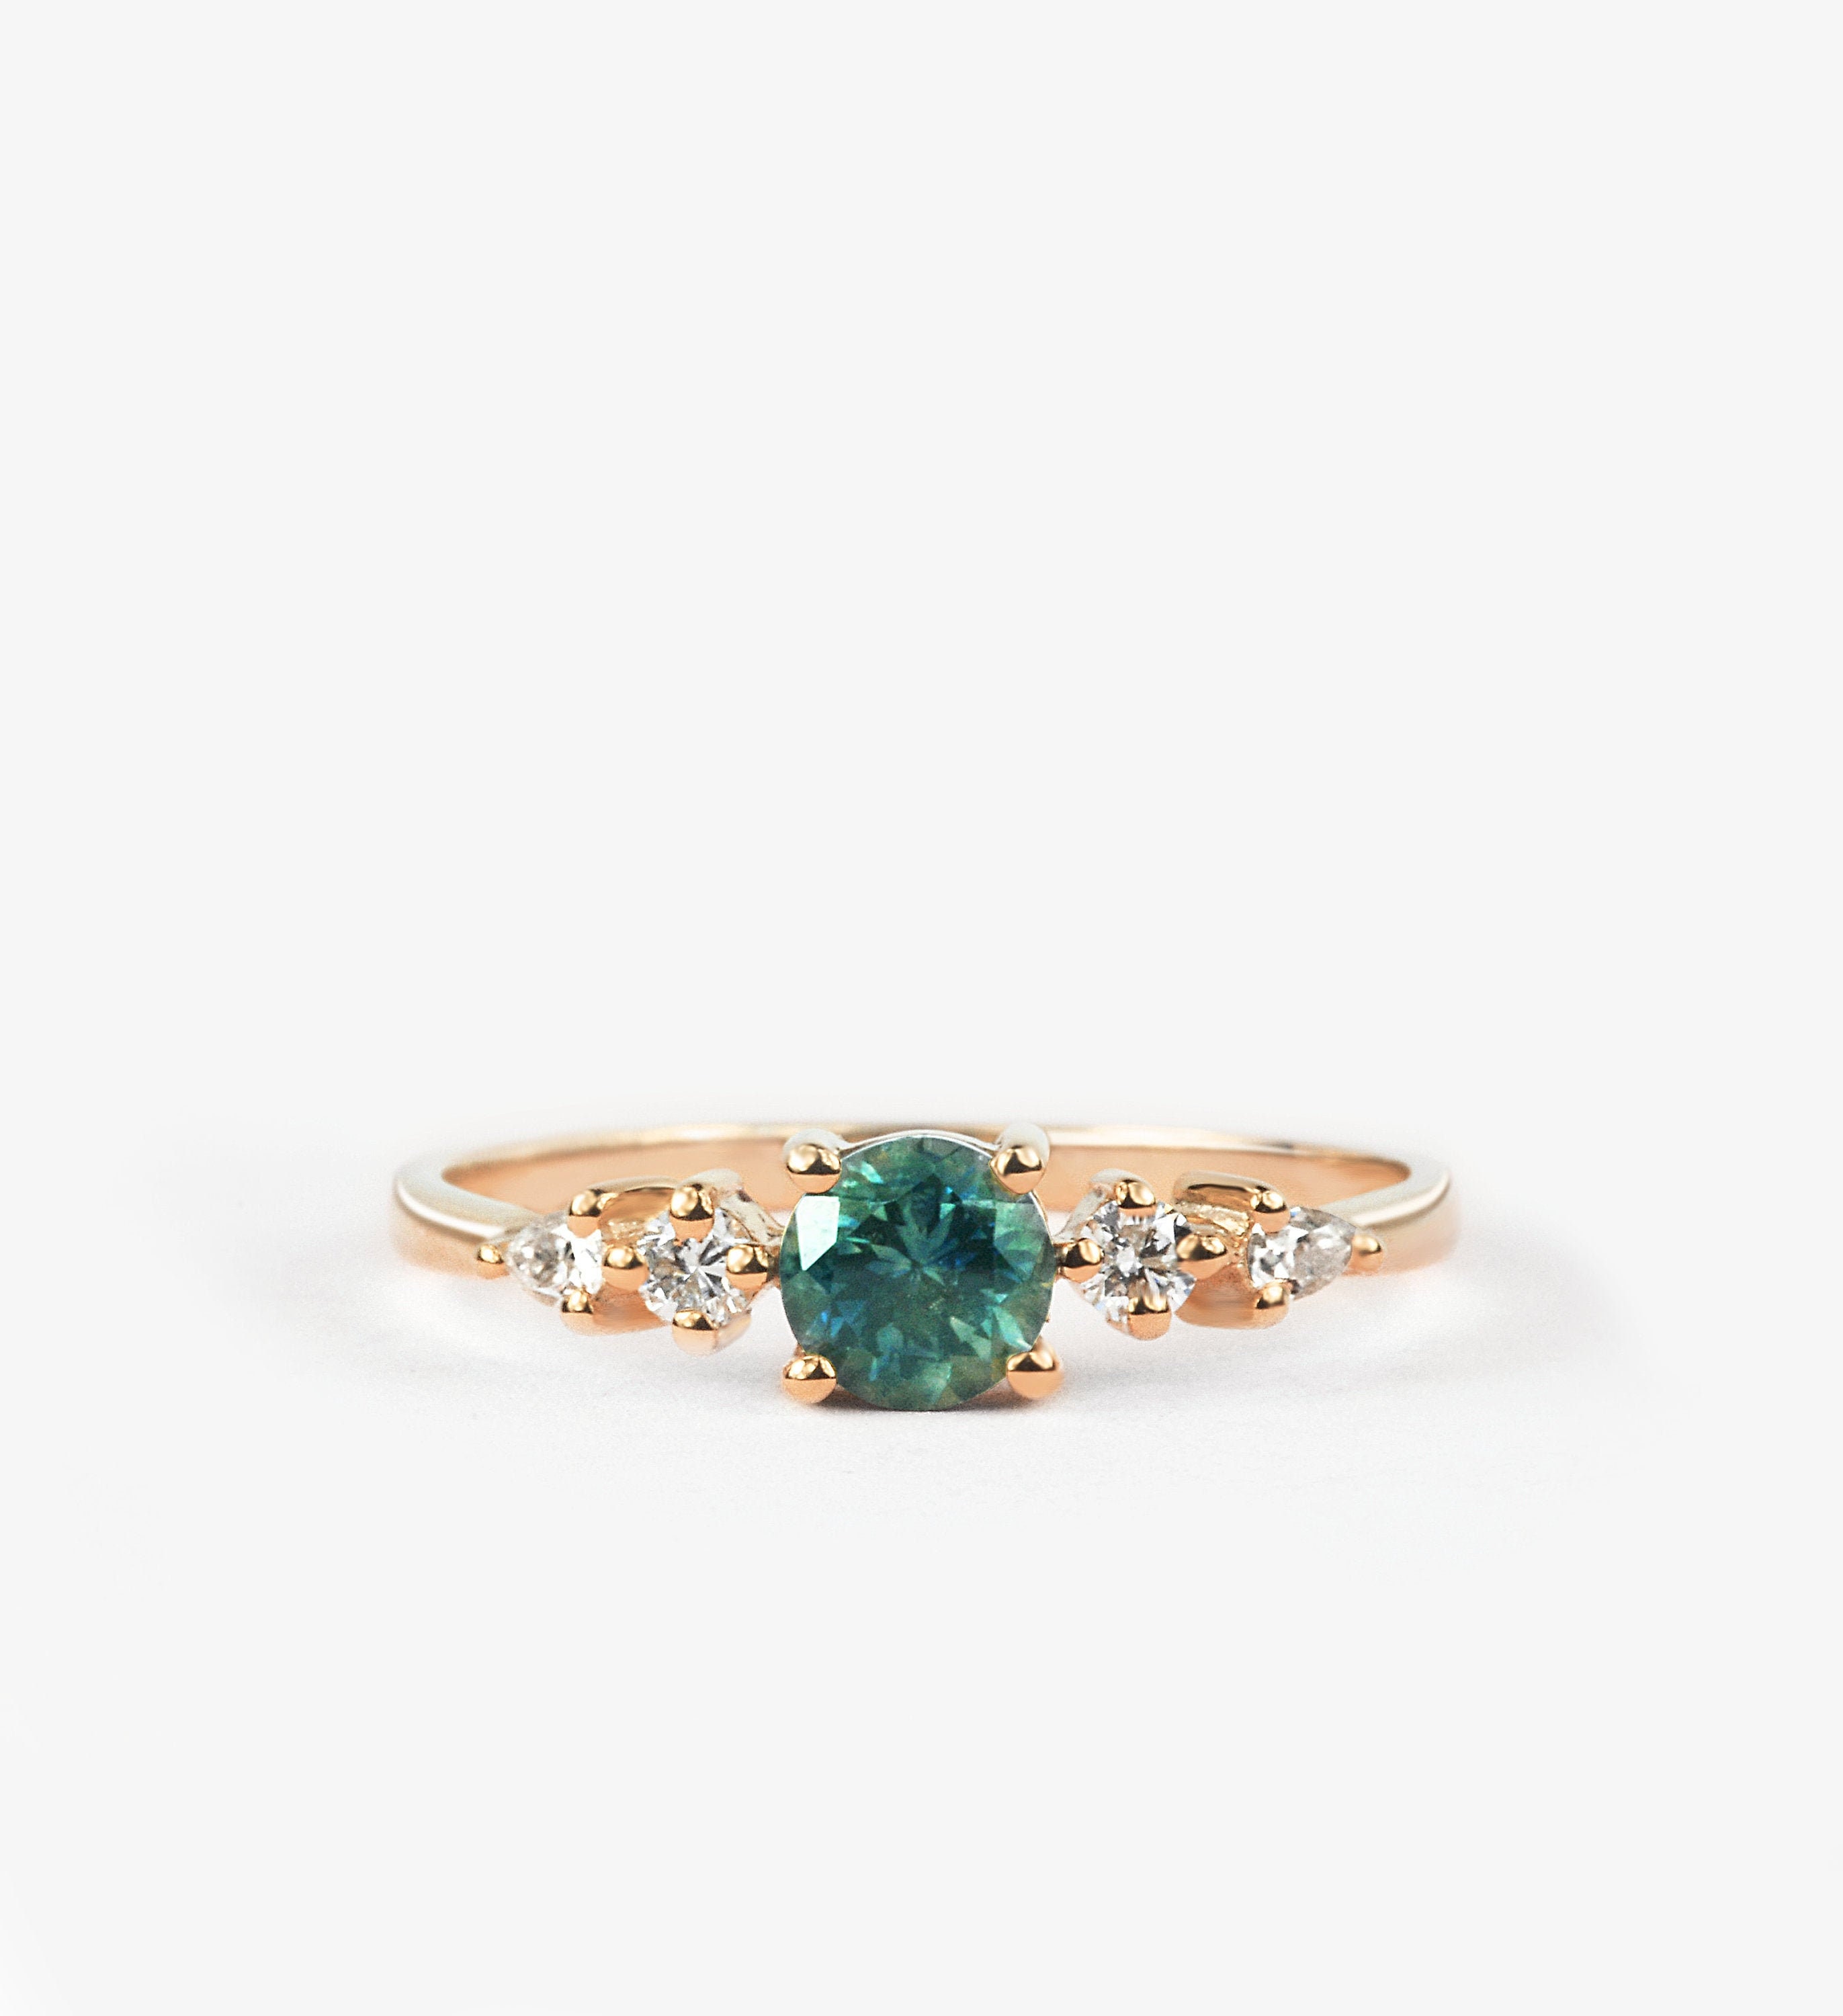 Teal Sapphire Engagement Ring Handmade in Rose/White/Yellow Gold, Ring, Dainty Thin